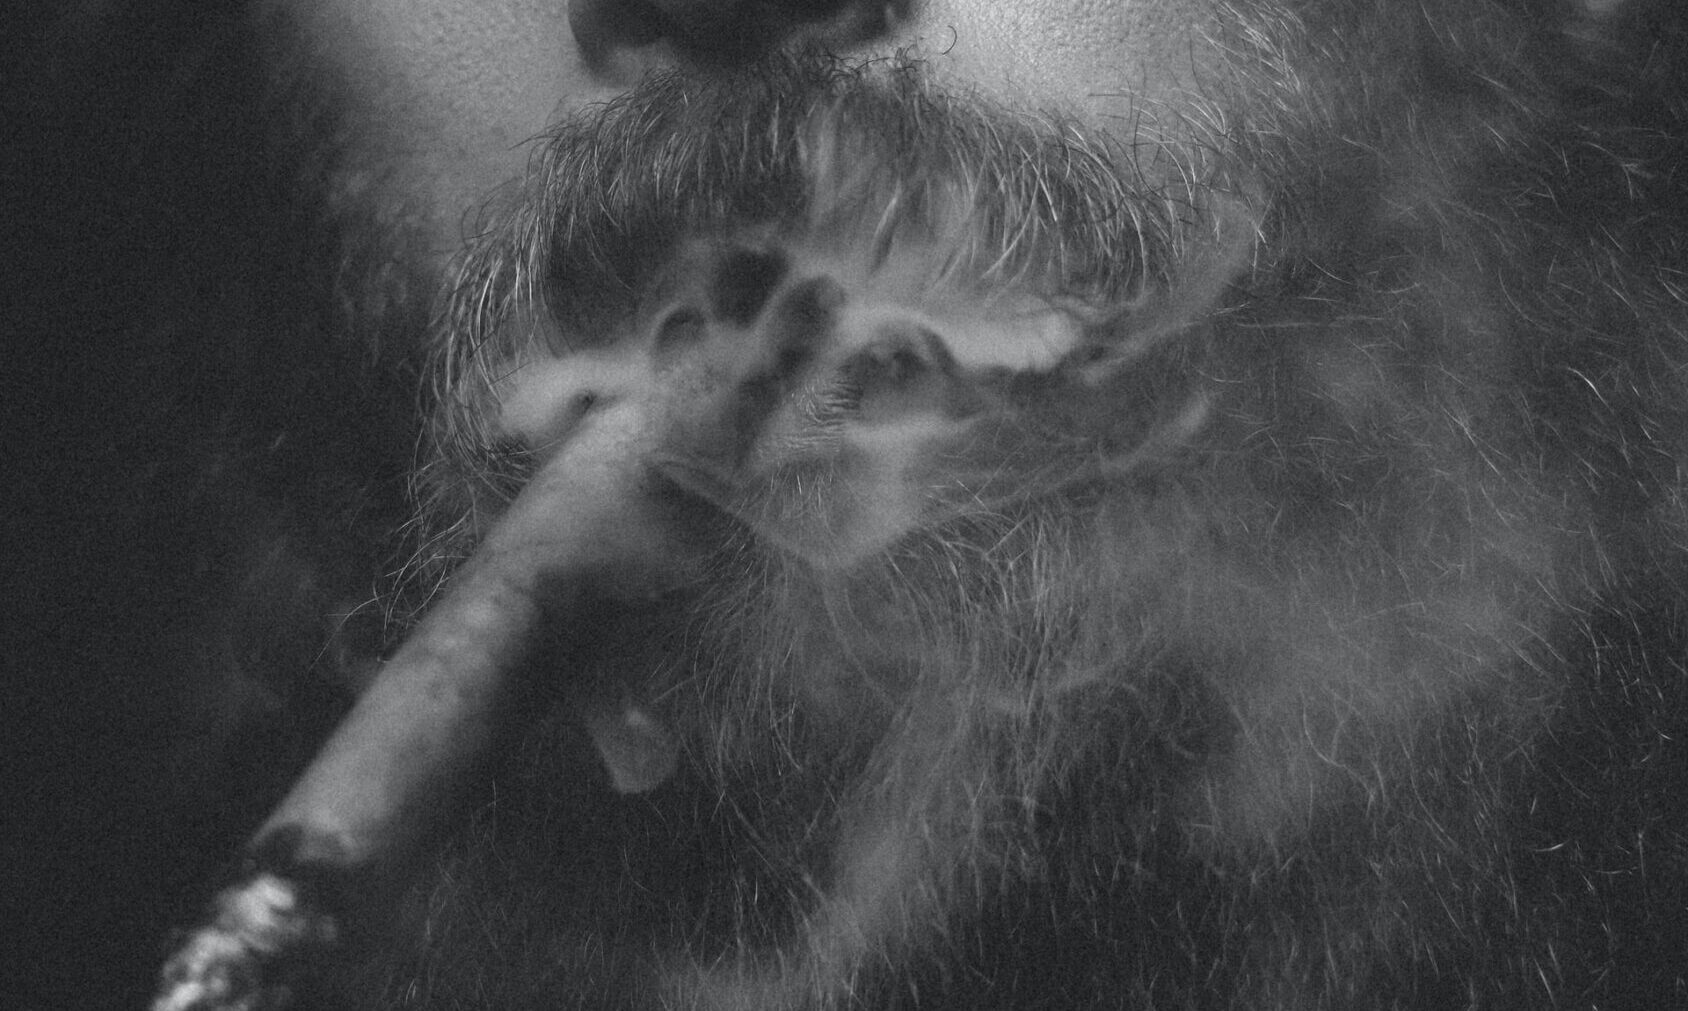 picture of a bearded man, smoking